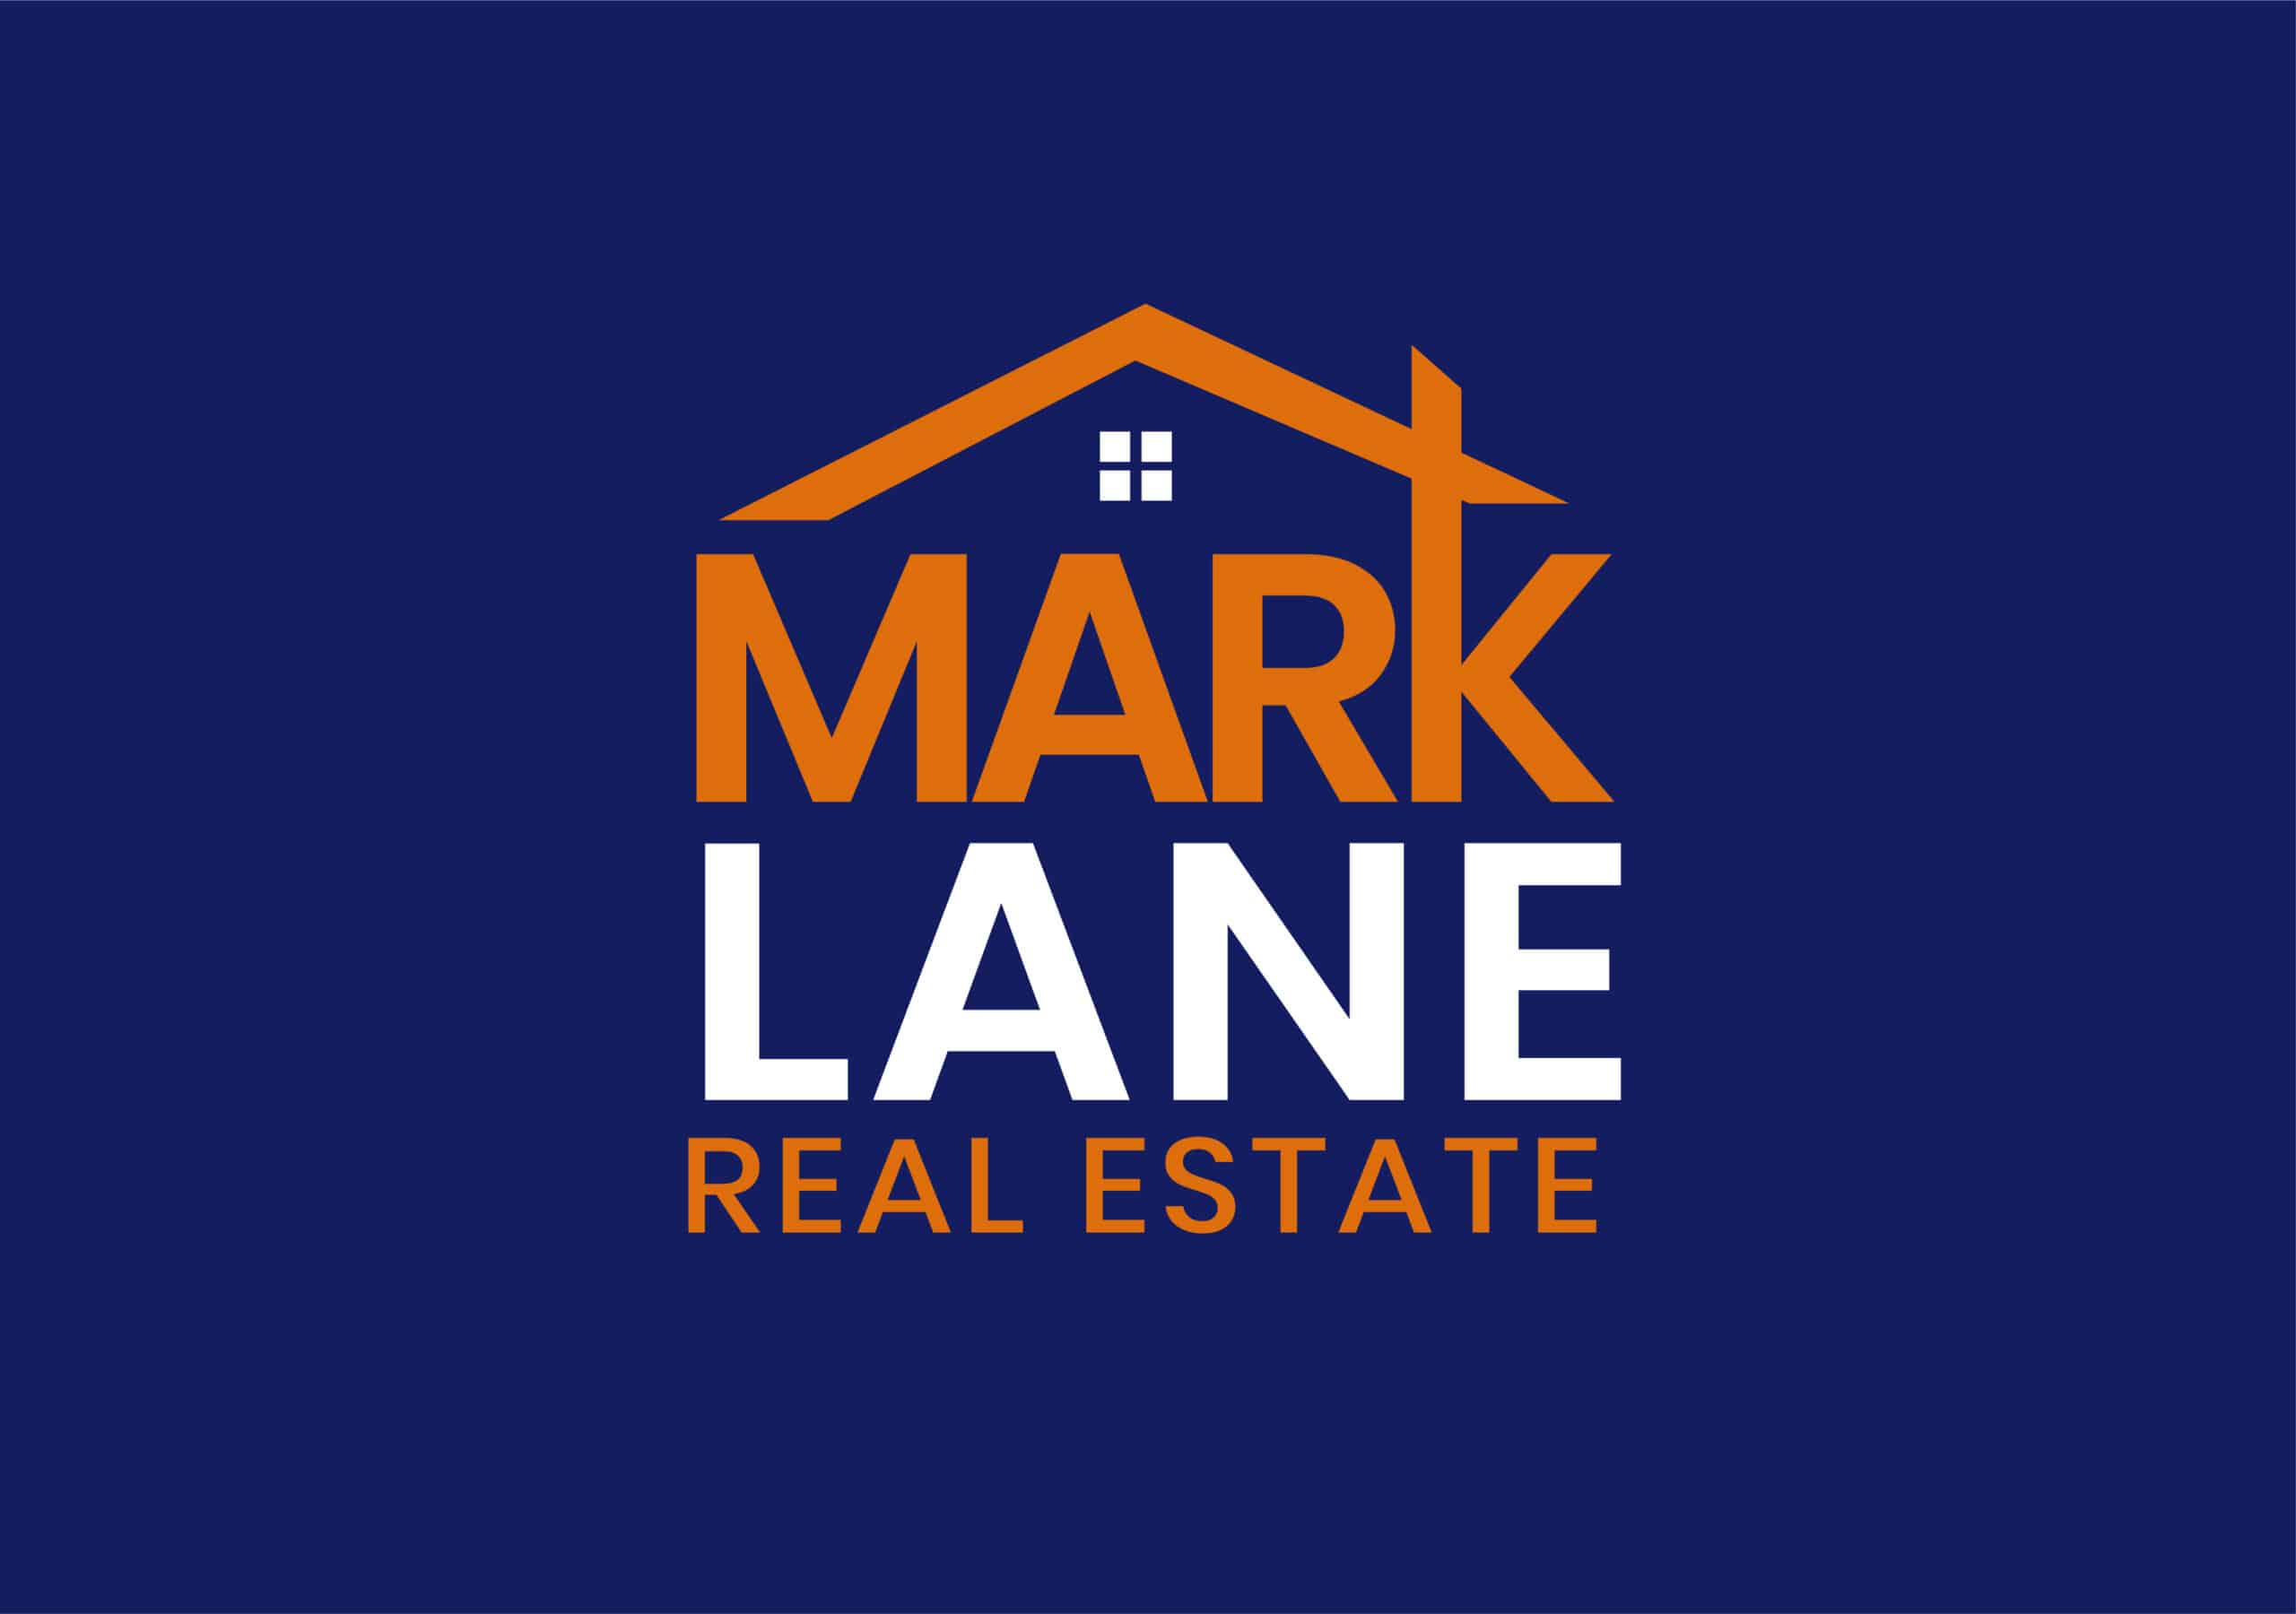 Did You Know? — Mark Lane Properties